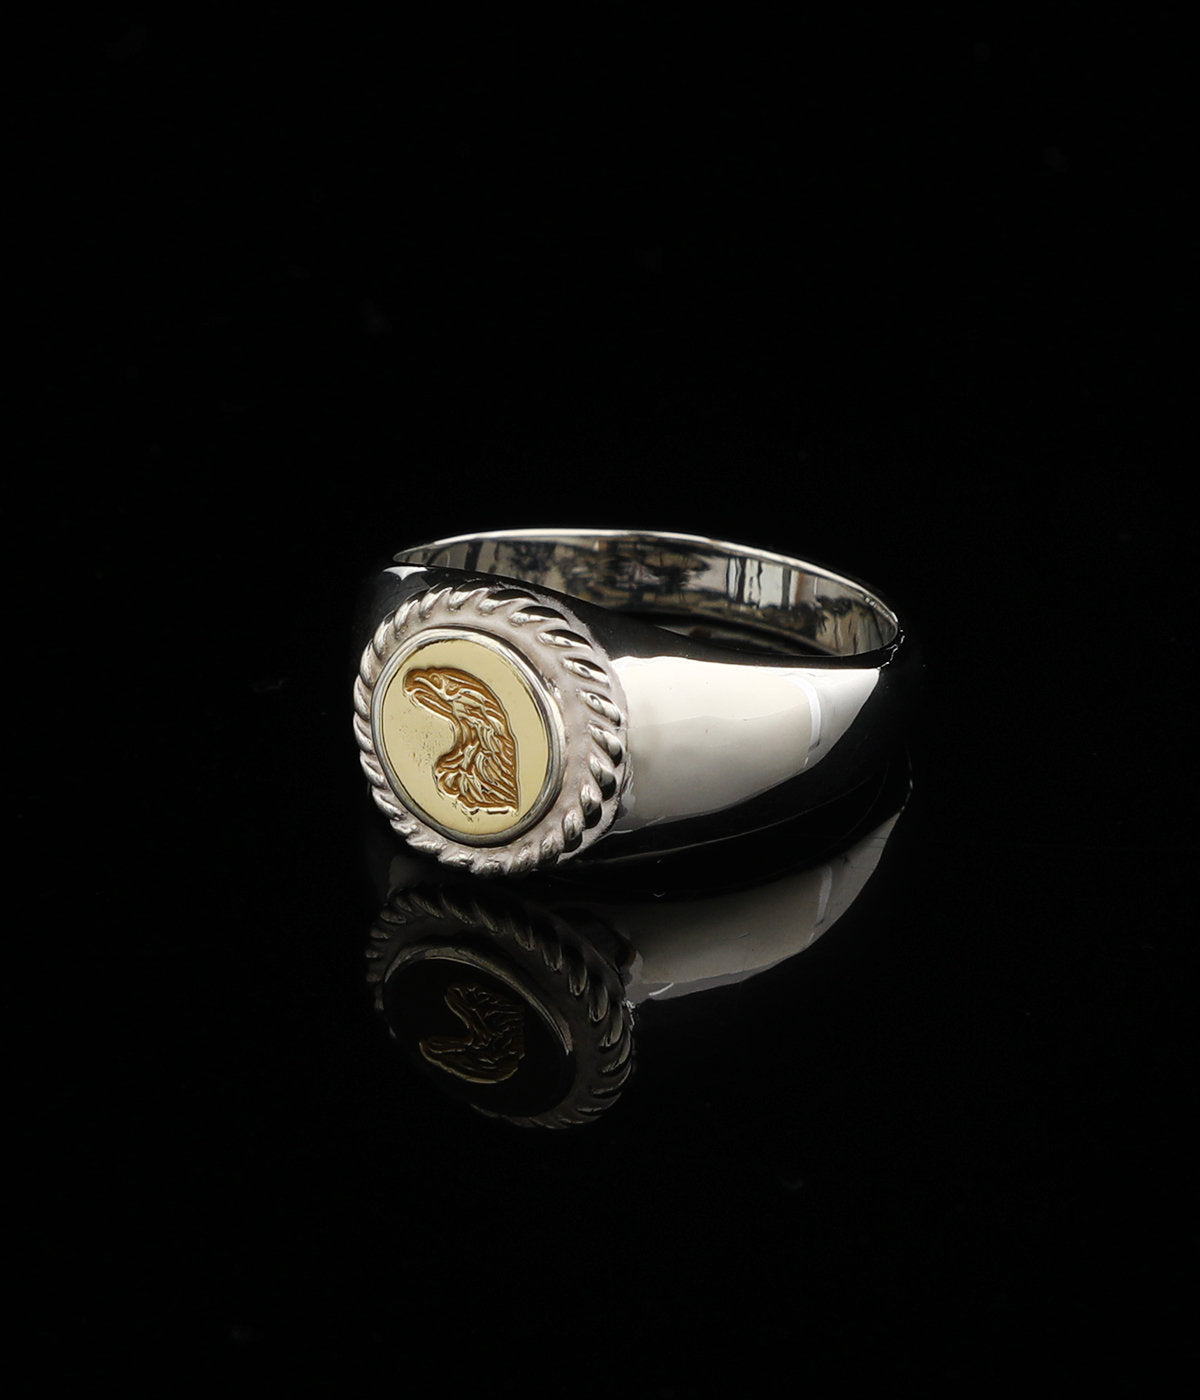 LARRY SMITH KARAKUSA EAGLE HEAD STAMPED RING (18K GOLD ACCENT) No 